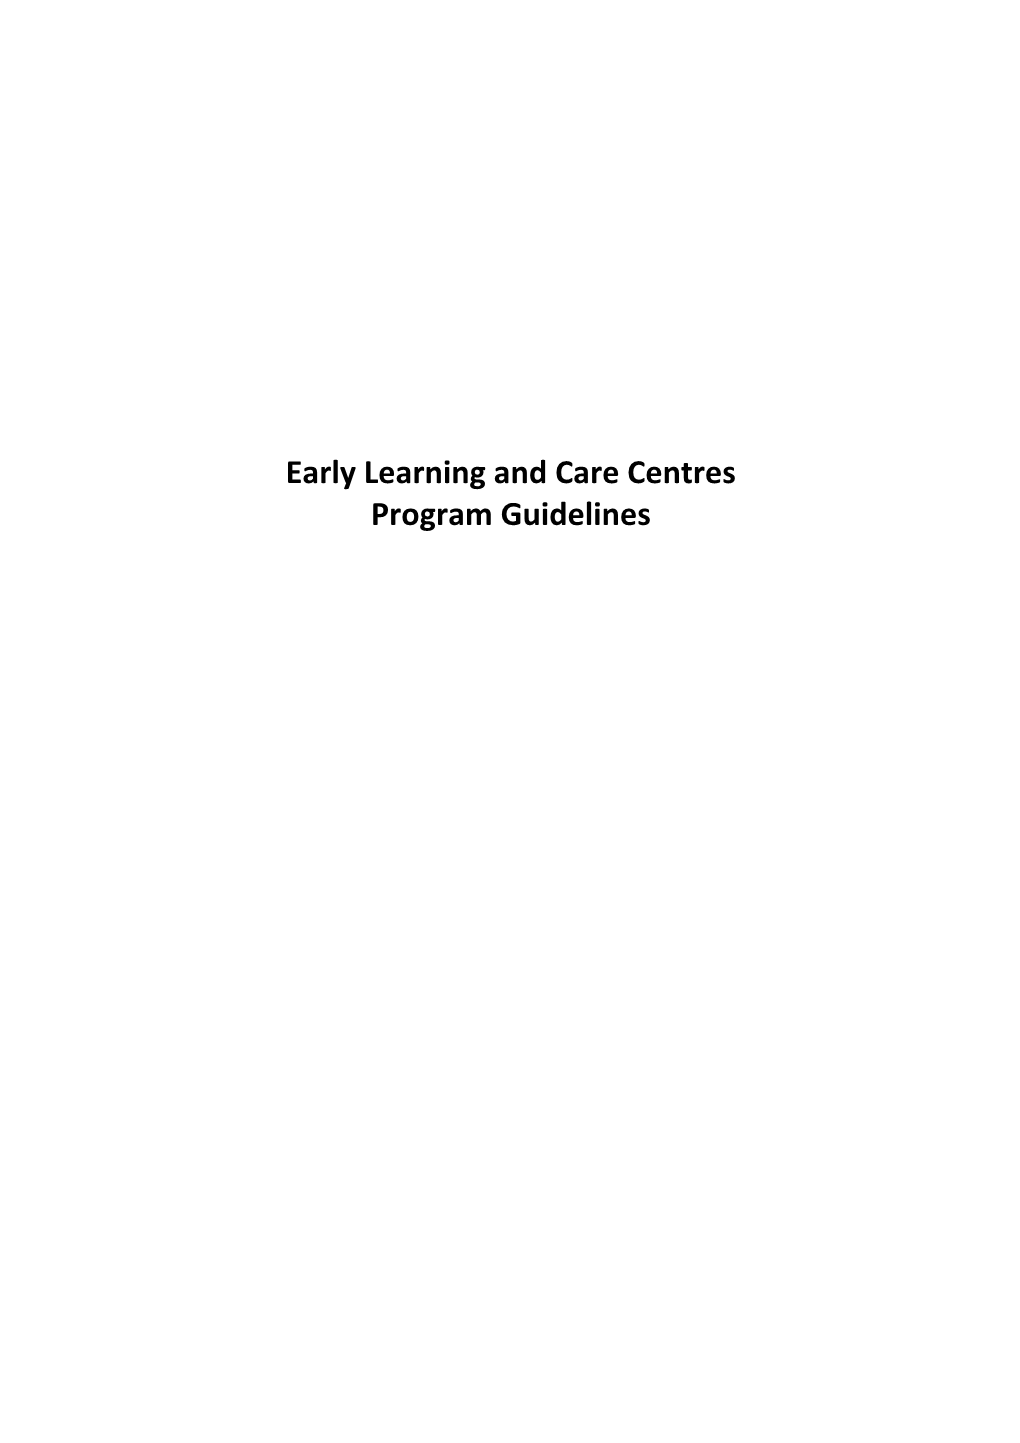 Early Learning and Care Centres